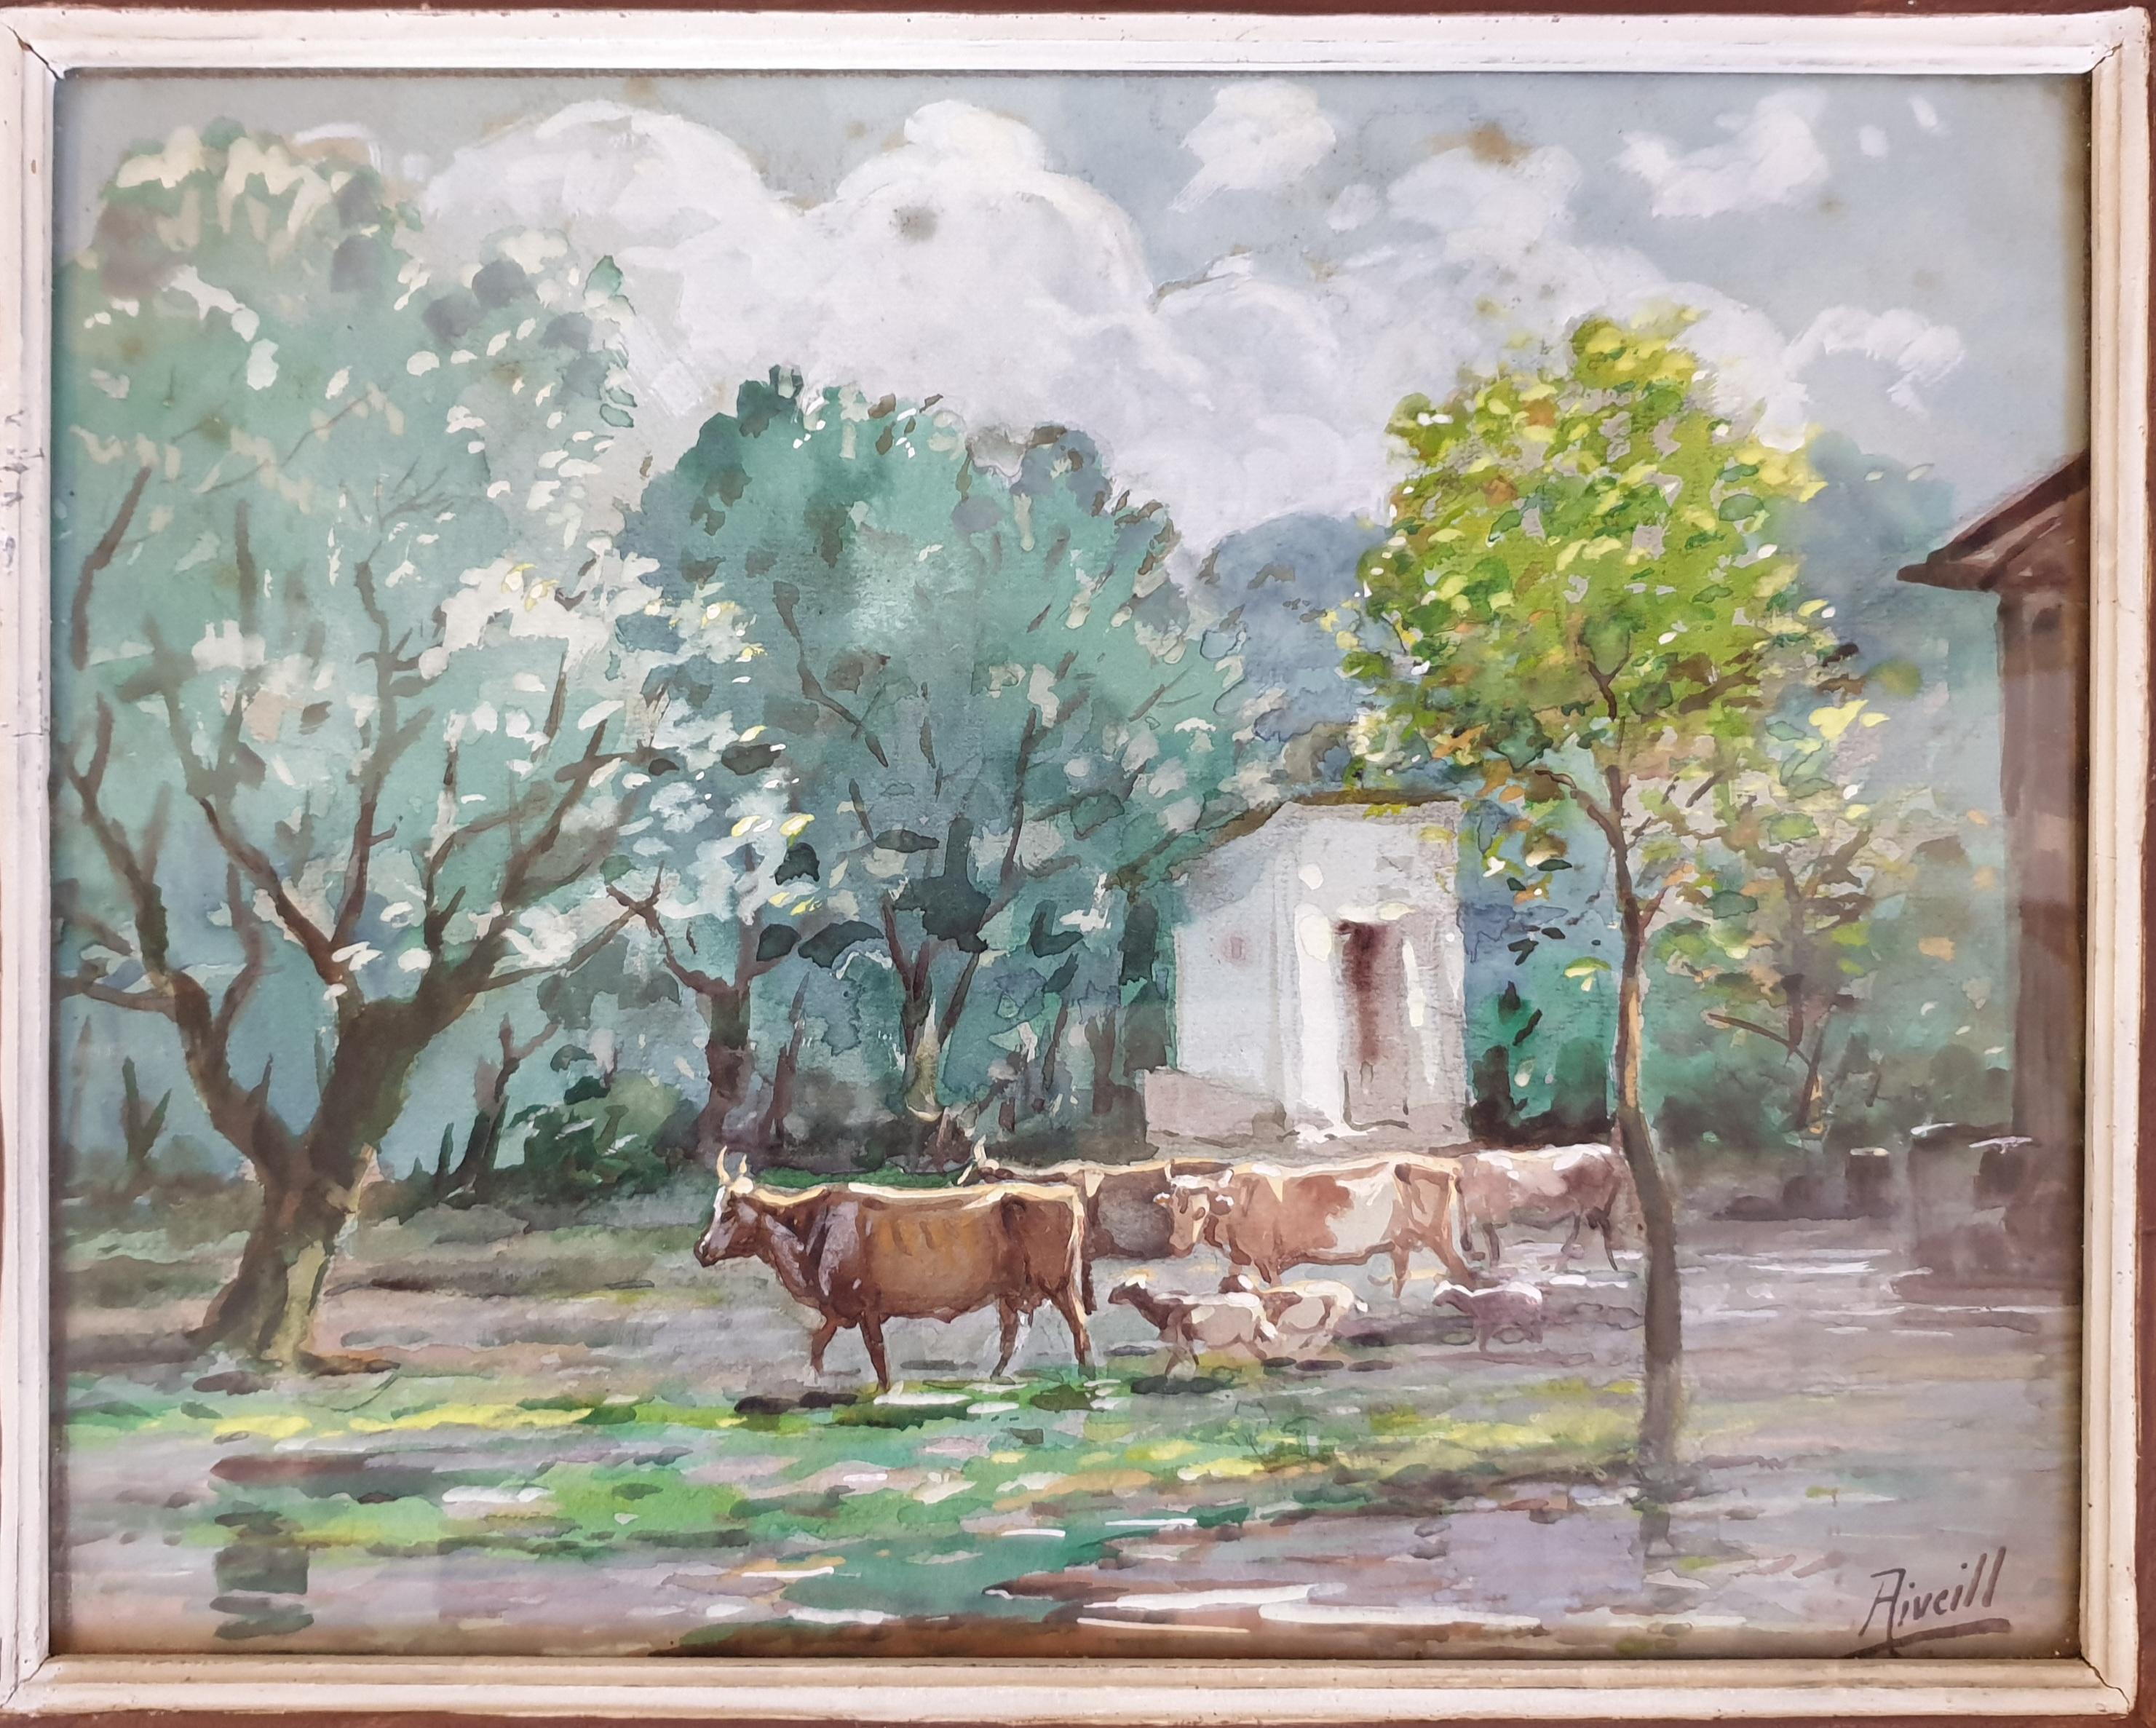 Cattle, Goats and Sheep Grazing, Orientalist Watercolour. - Art by Aiveill